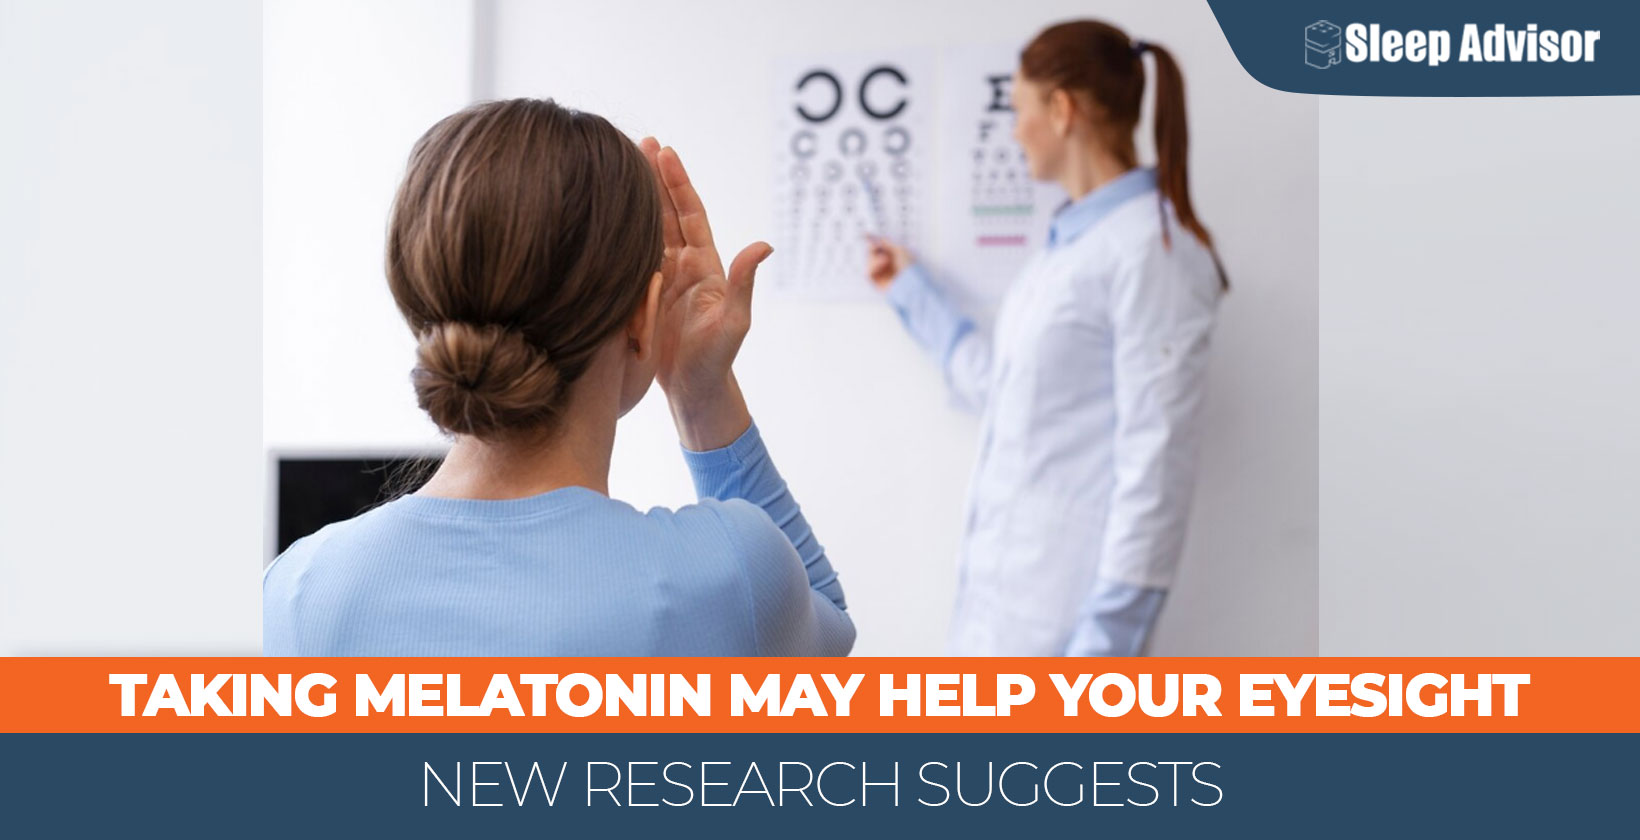 New Research Suggests Taking Melatonin May Help Your Eyesight